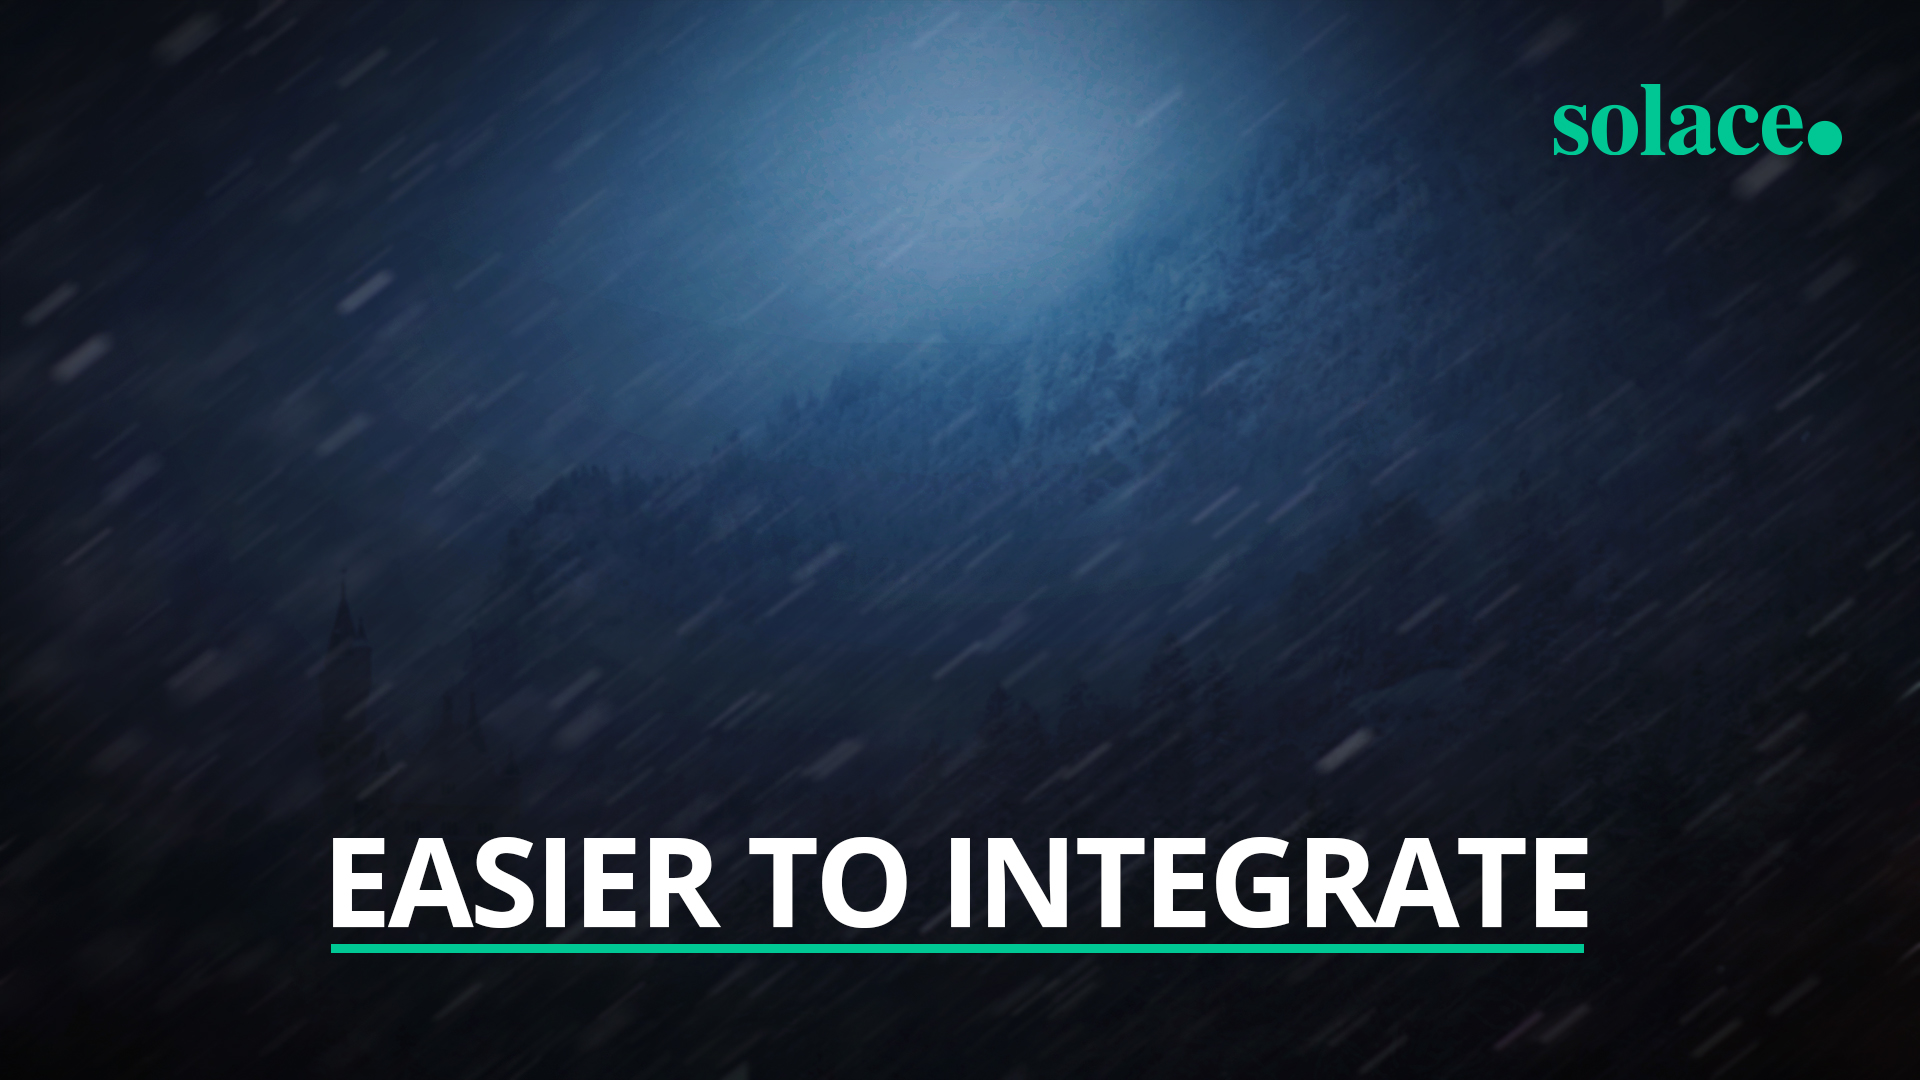 The Winter Solace Product Update 2021 - Easier to Integrate